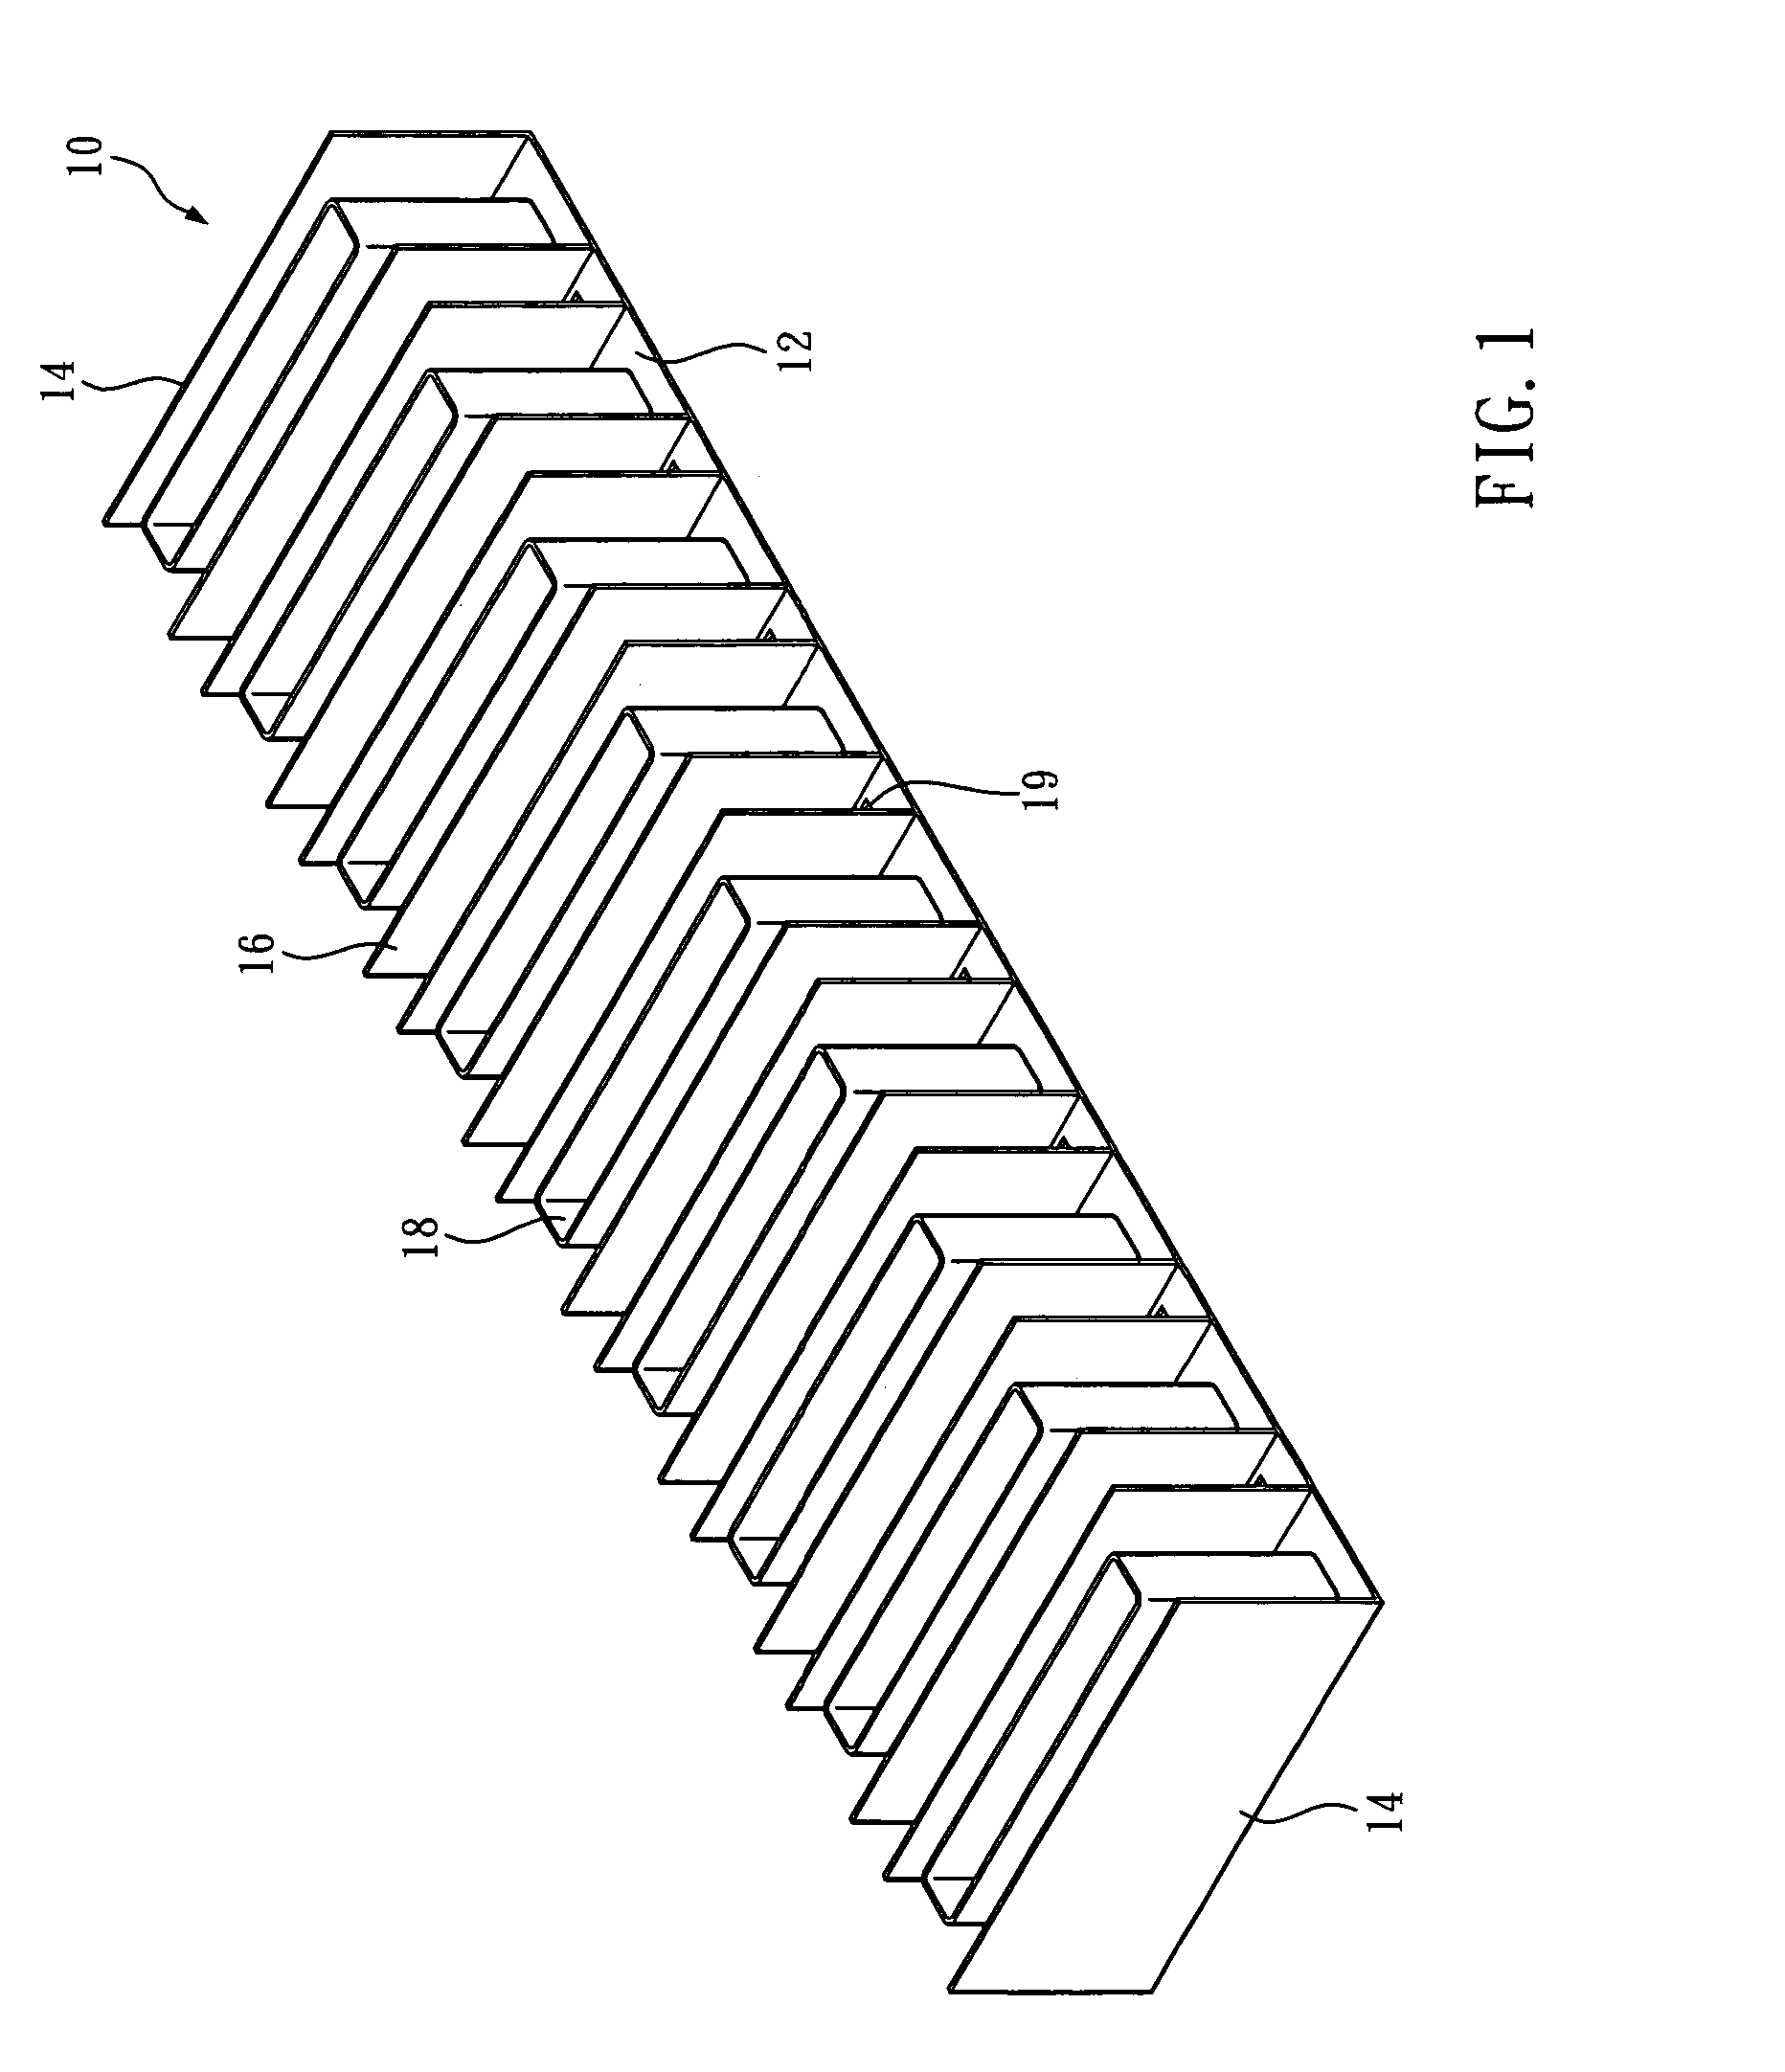 Insulation device for linear motor